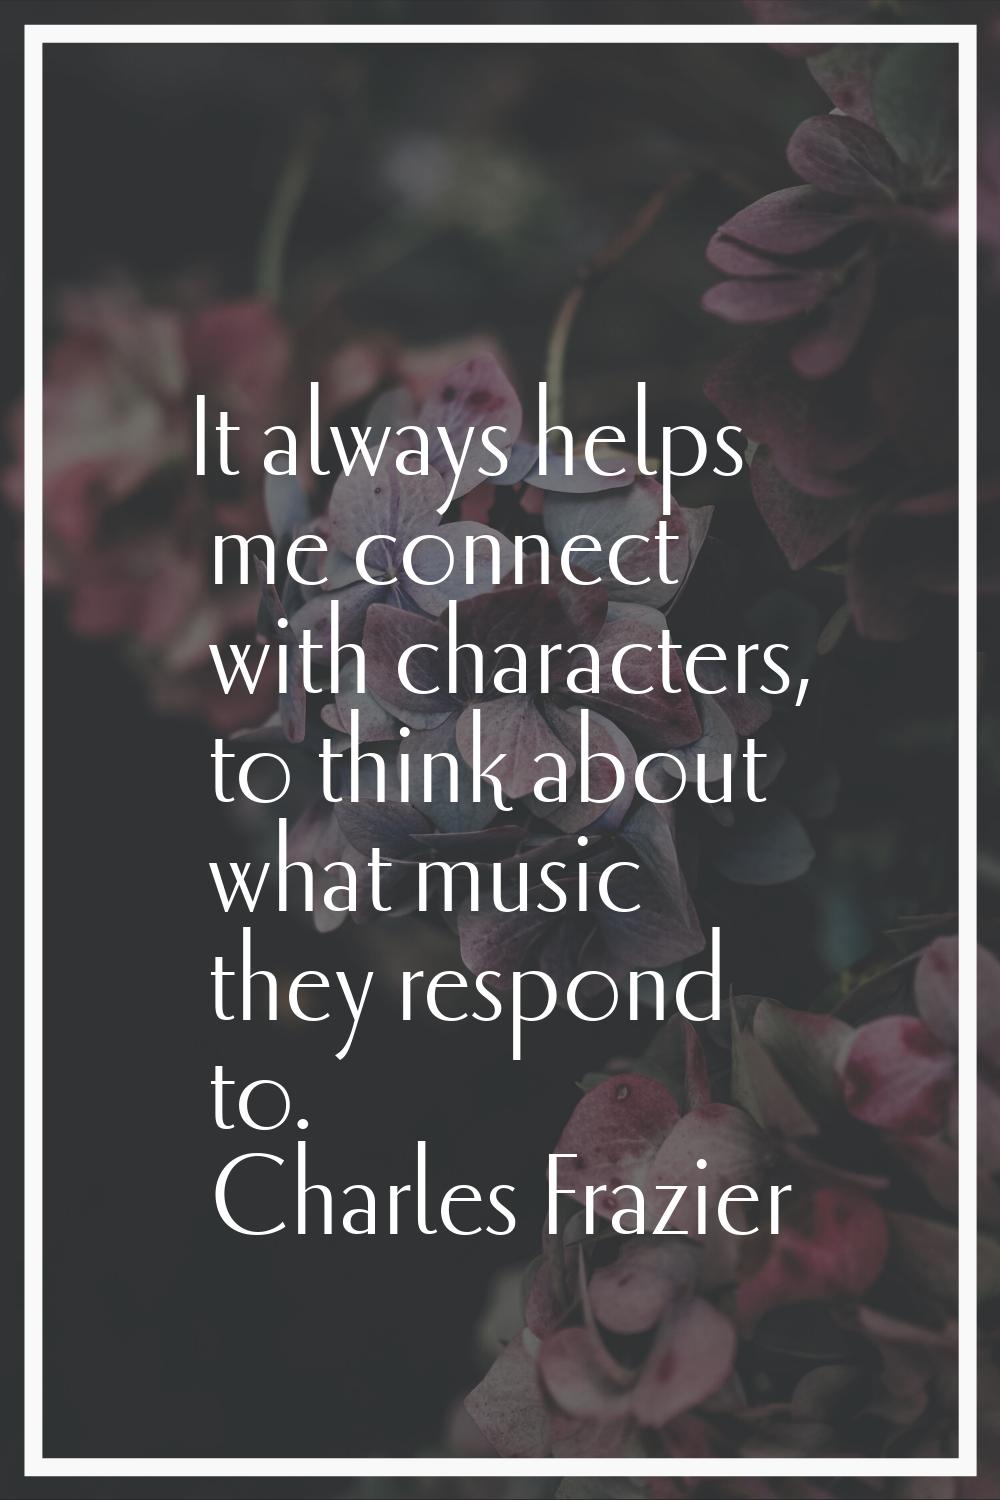 It always helps me connect with characters, to think about what music they respond to.